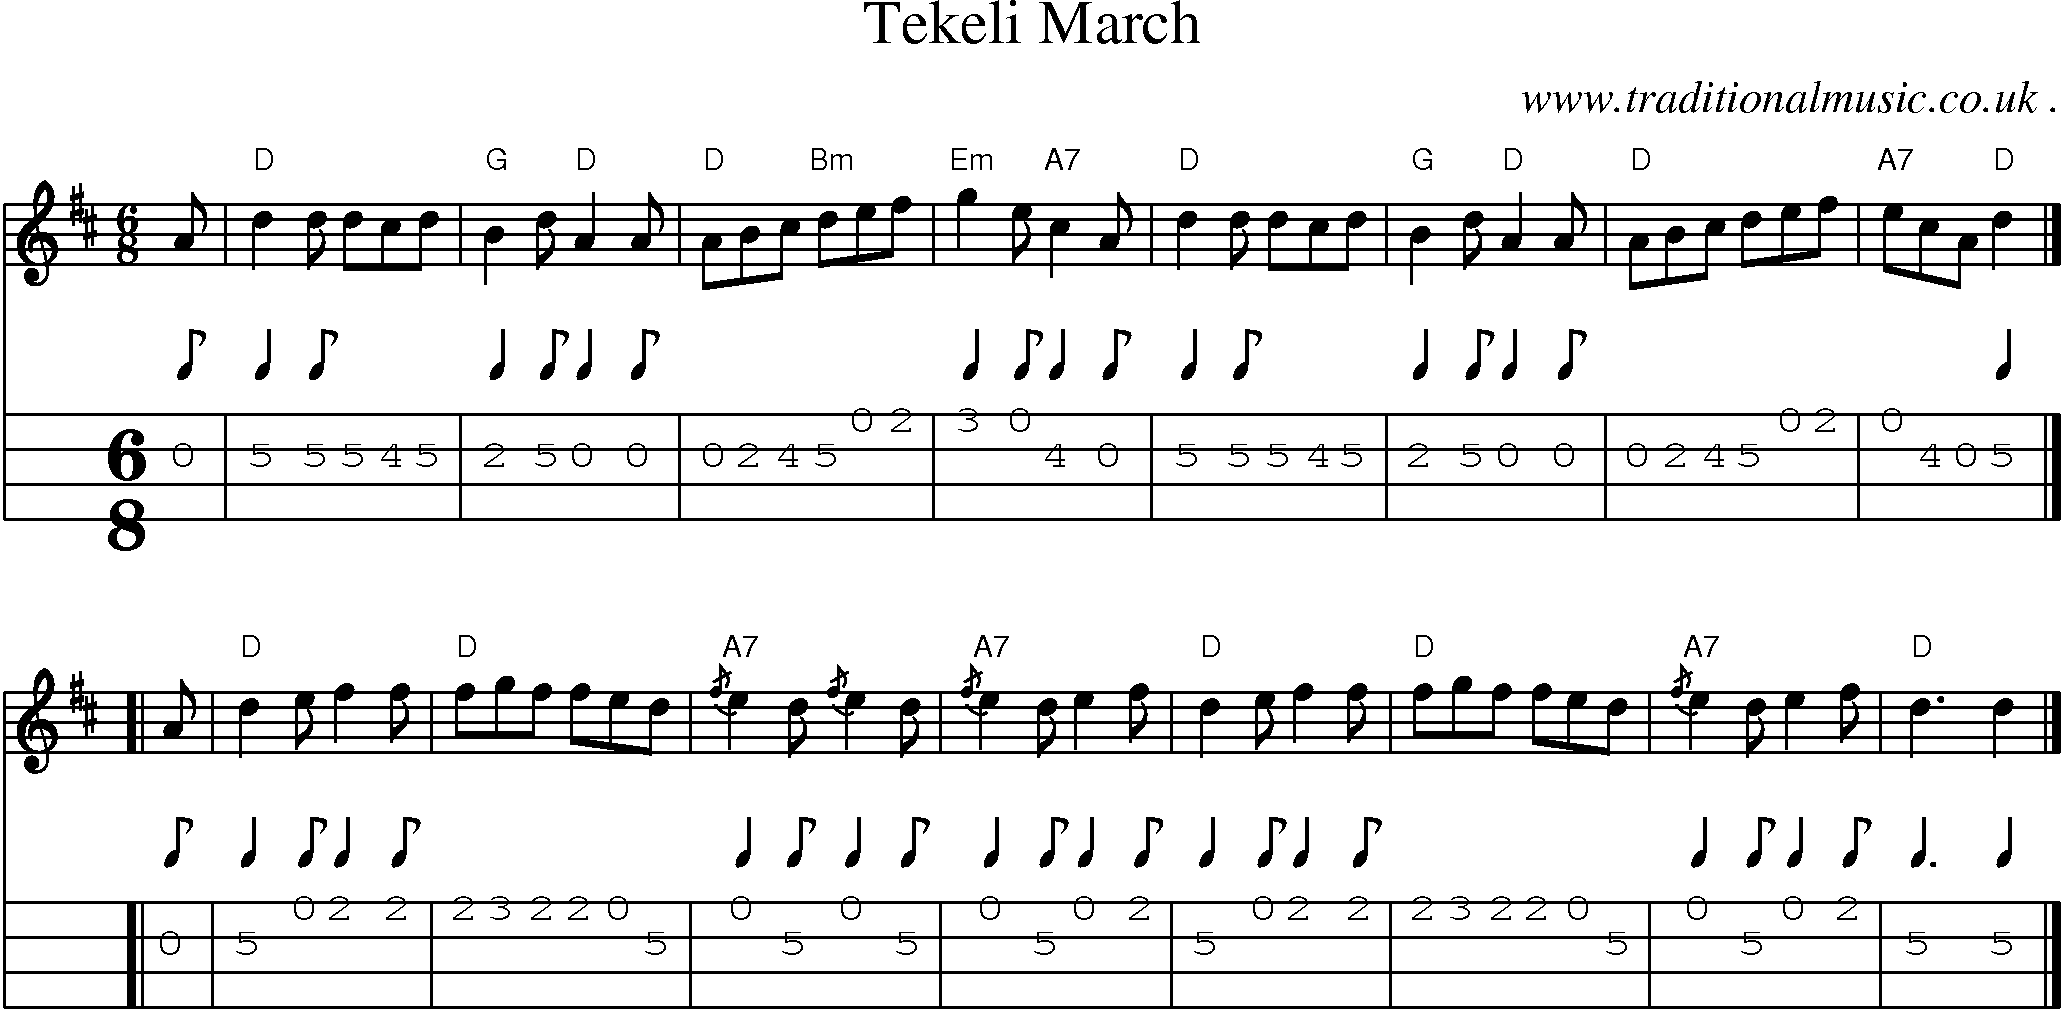 Sheet-music  score, Chords and Mandolin Tabs for Tekeli March